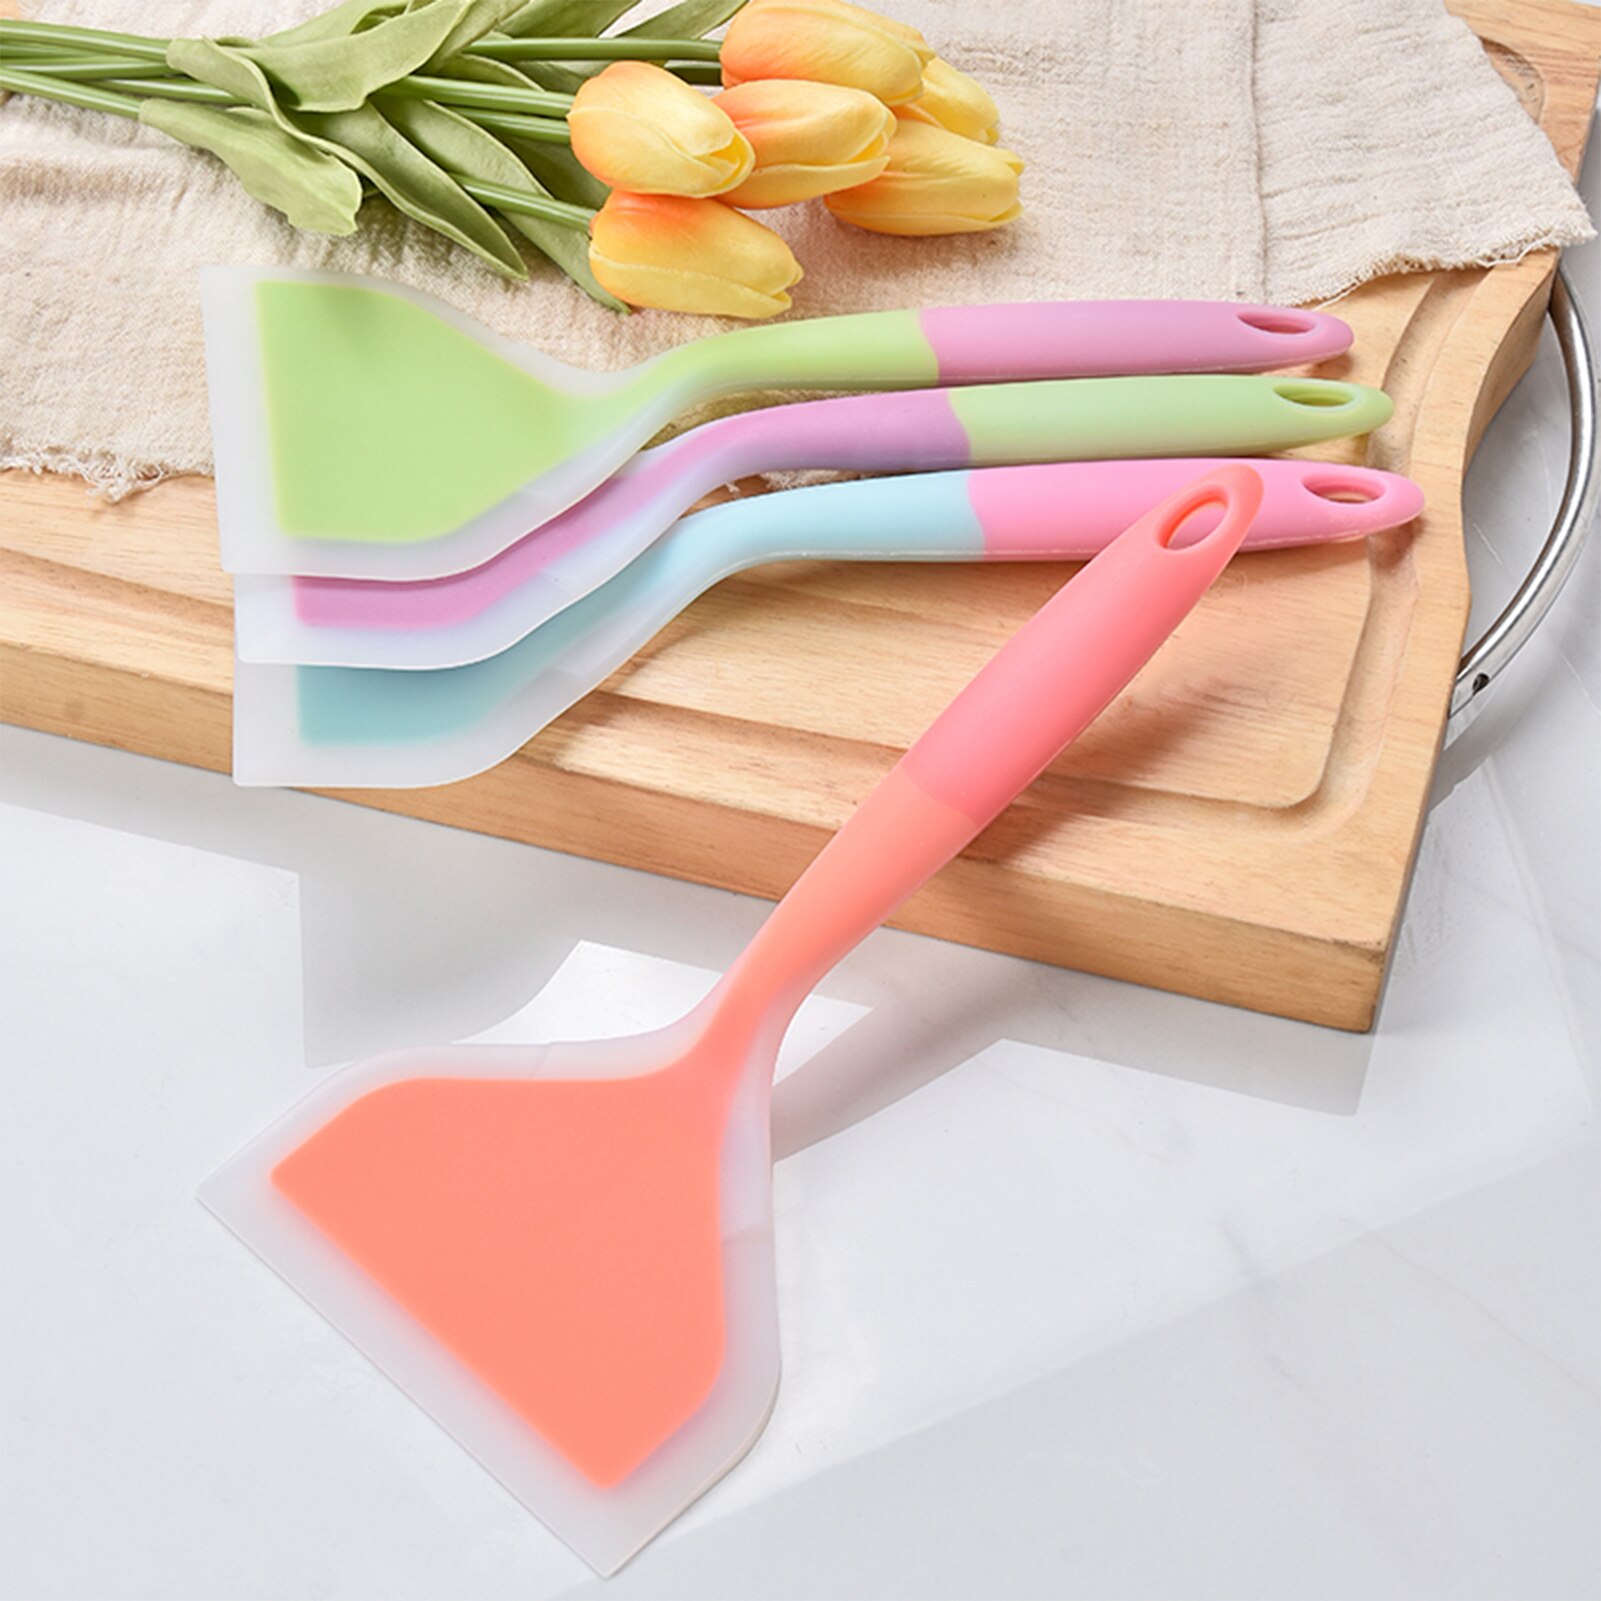 Silicone Spatula Food-Grade Spatula Turner Nonstick Kitchen Utensils Meat Spatula Shovel Cooking Baking Mixing Cooking Tools